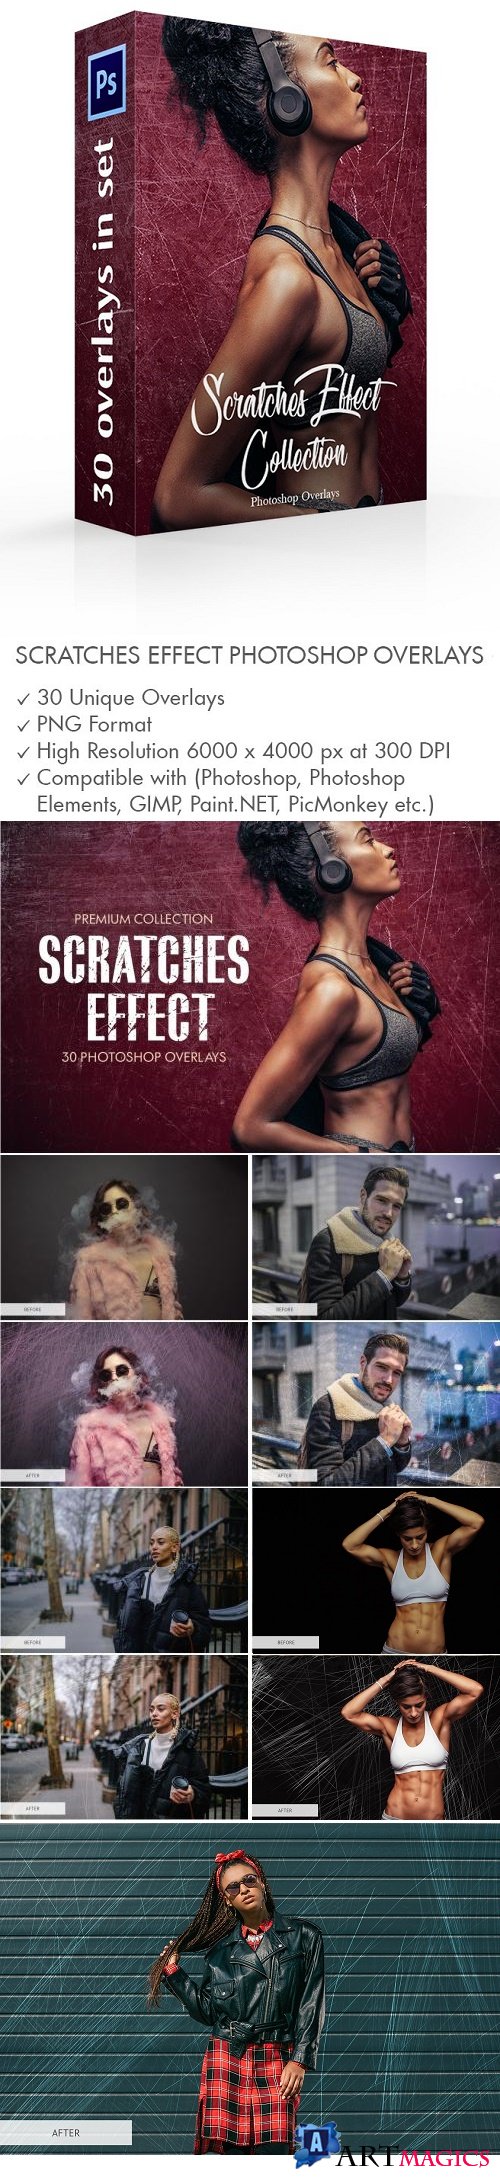 Scratches Effect Photoshop Overlays - 3894027